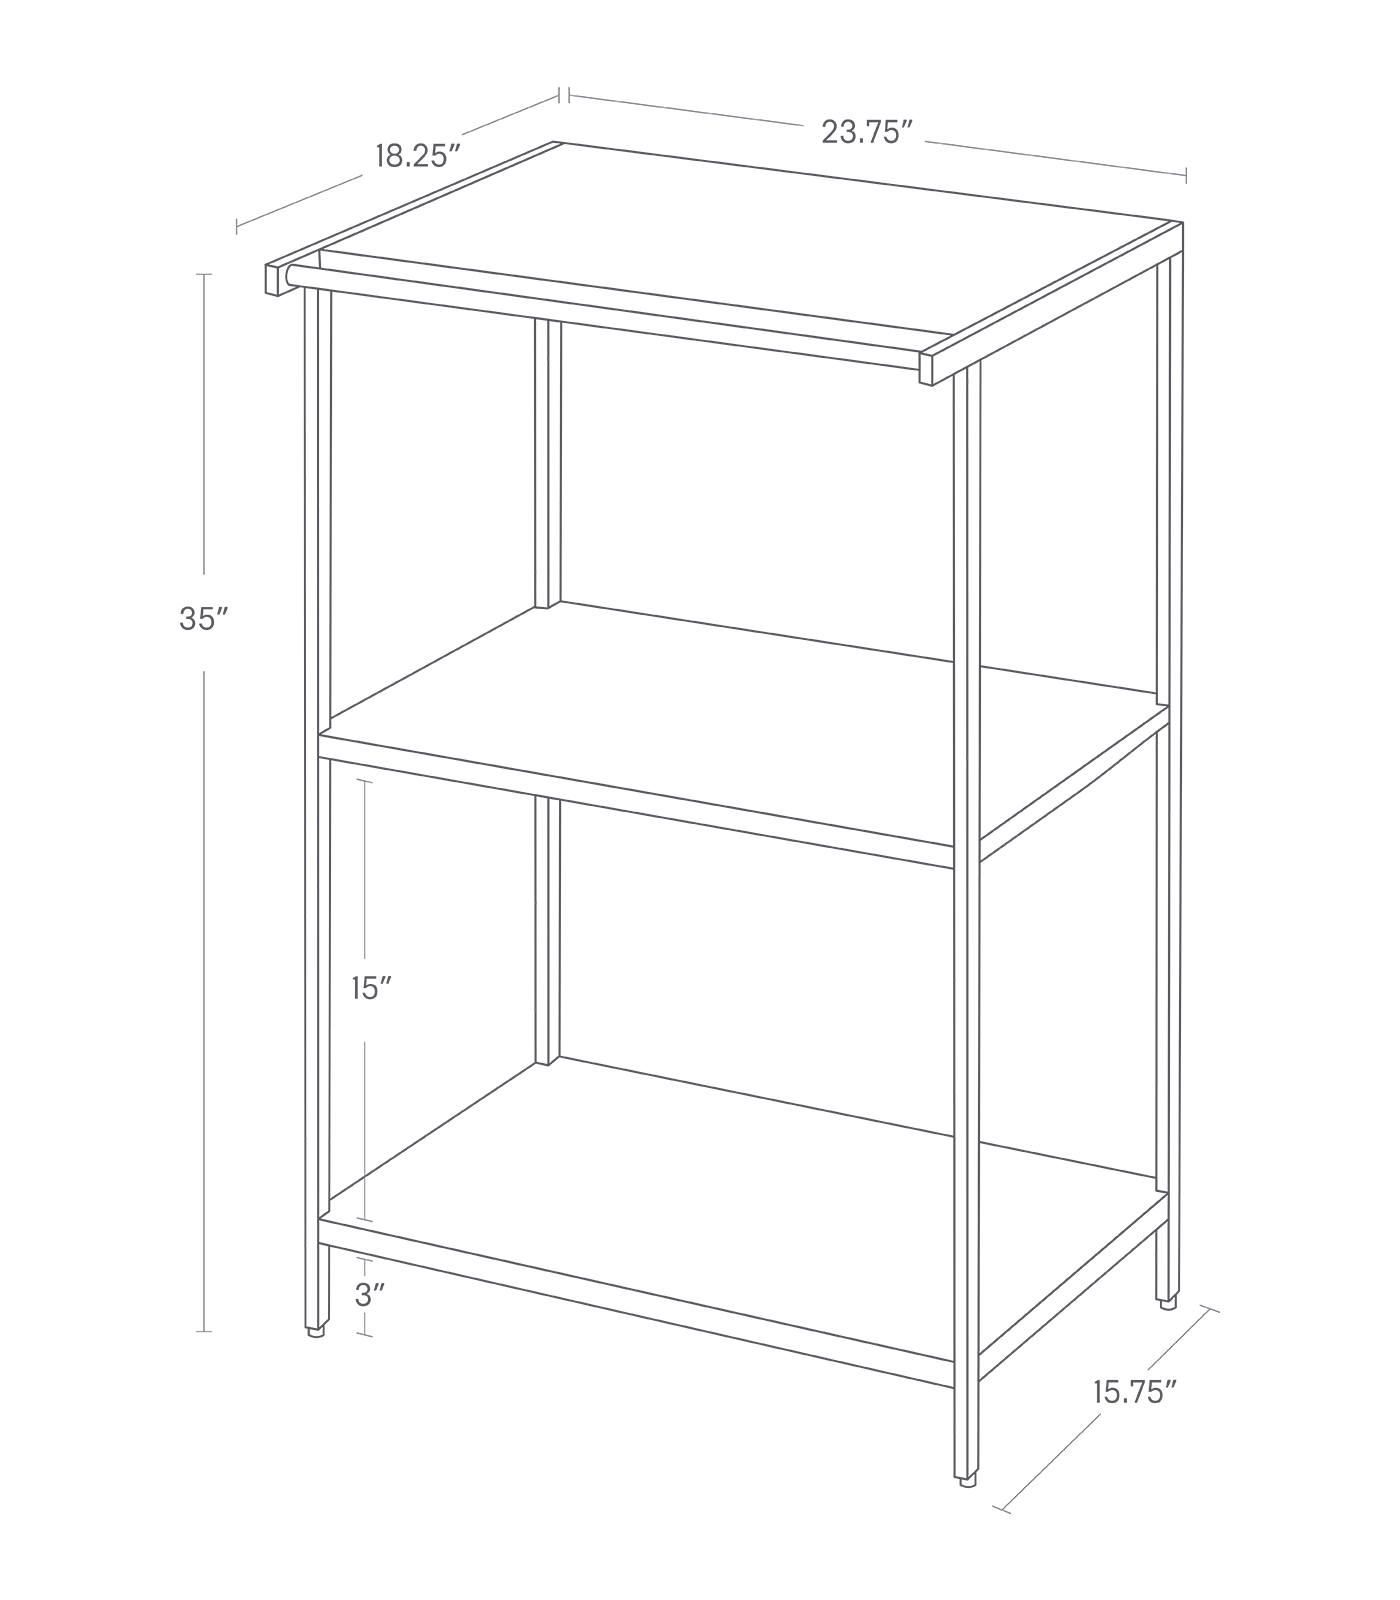 TOWER Storage Rack. Size: 35 inches. 35 inches tall, 23.75 inches long, 18.25 inches wide. Bottom shelf 3 inches from ground, shelves 15 inches apart.